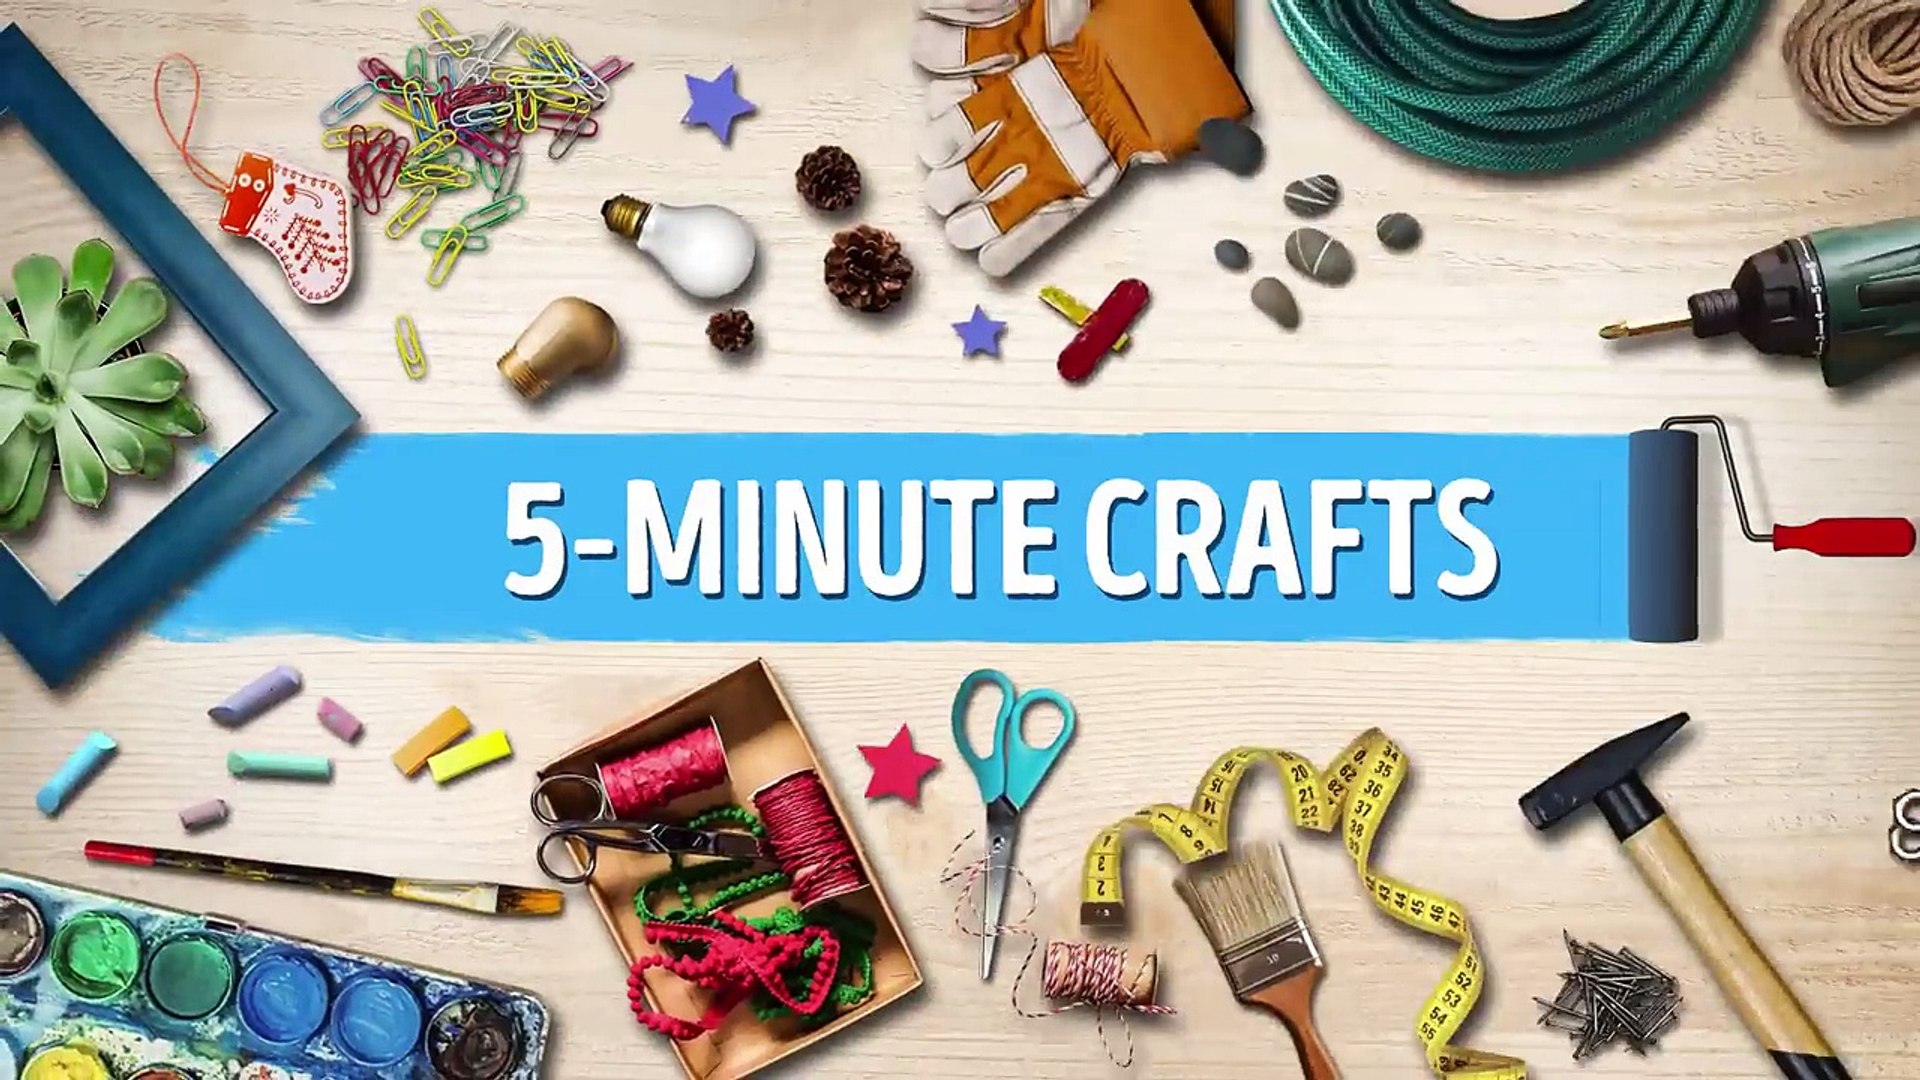 5 Minute Crafts For Seniors - Crafts DIY and Ideas Blog